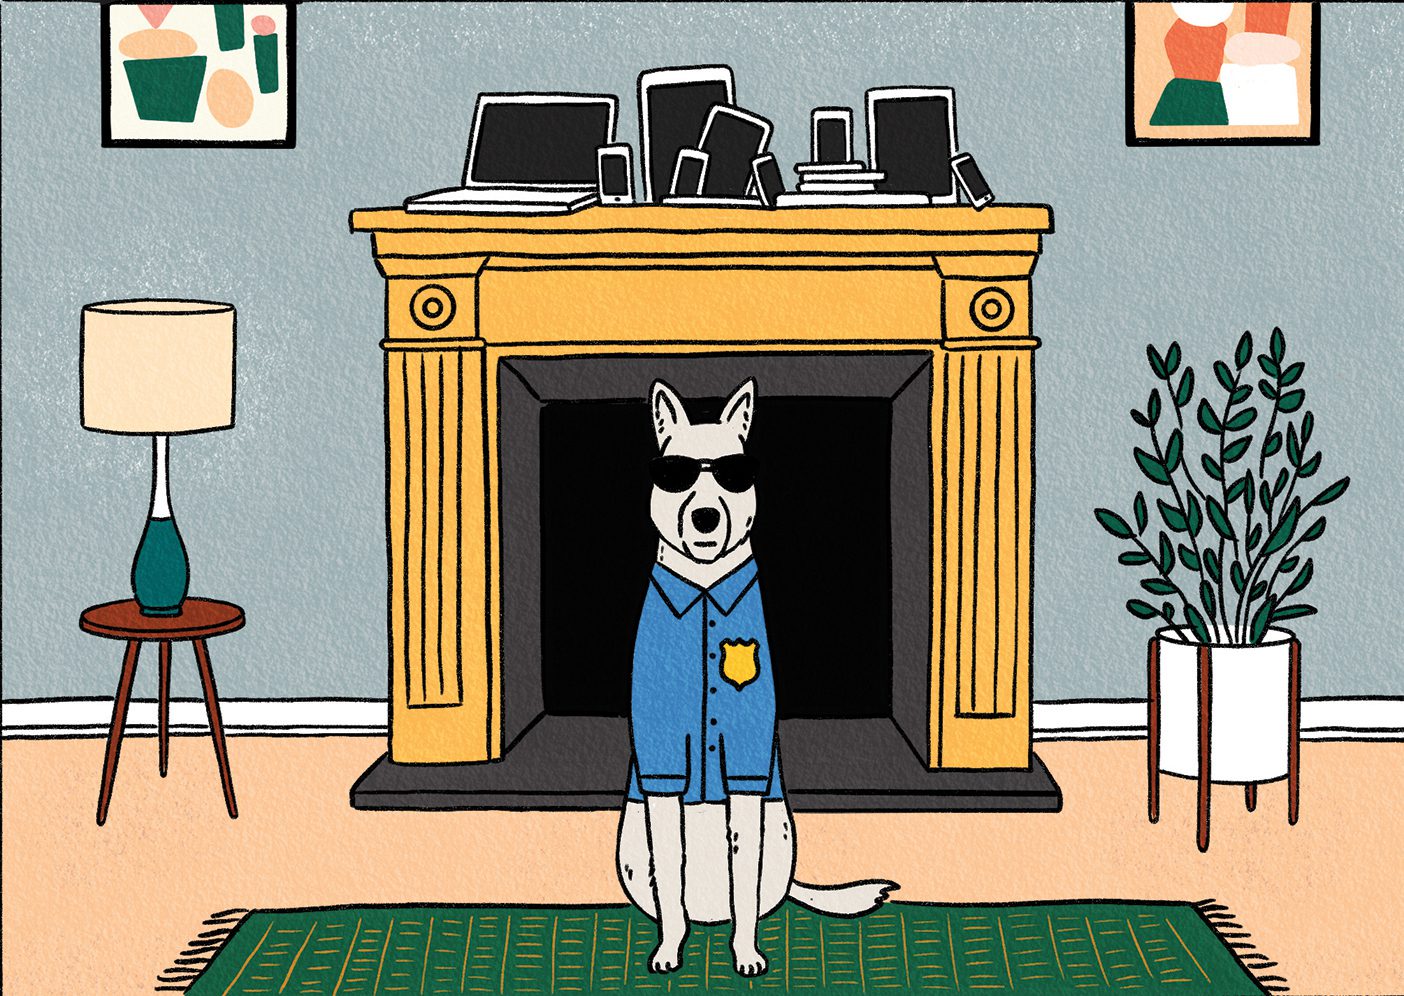 Illustration of dog standing watch over a home's electronic devices.